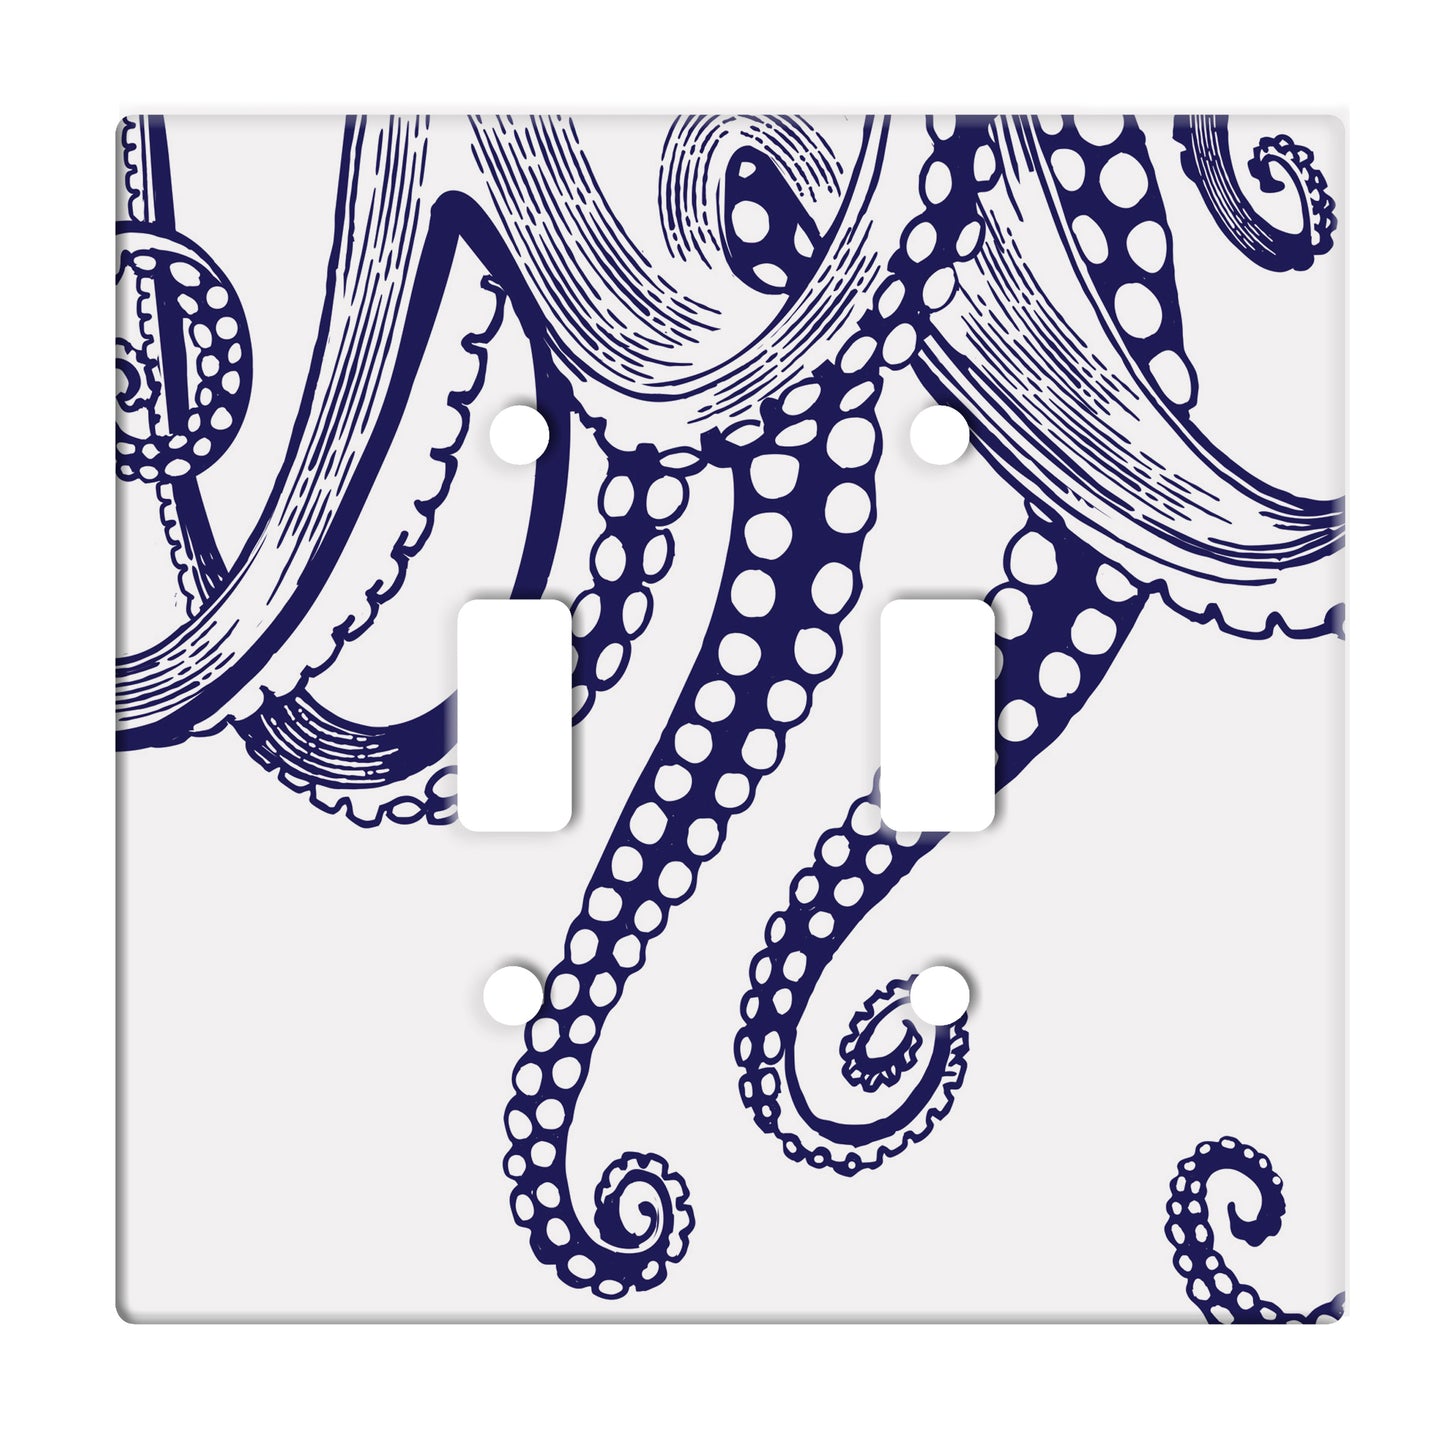 white ceramic double toggle switch plate featuring navy octopus tentacles.